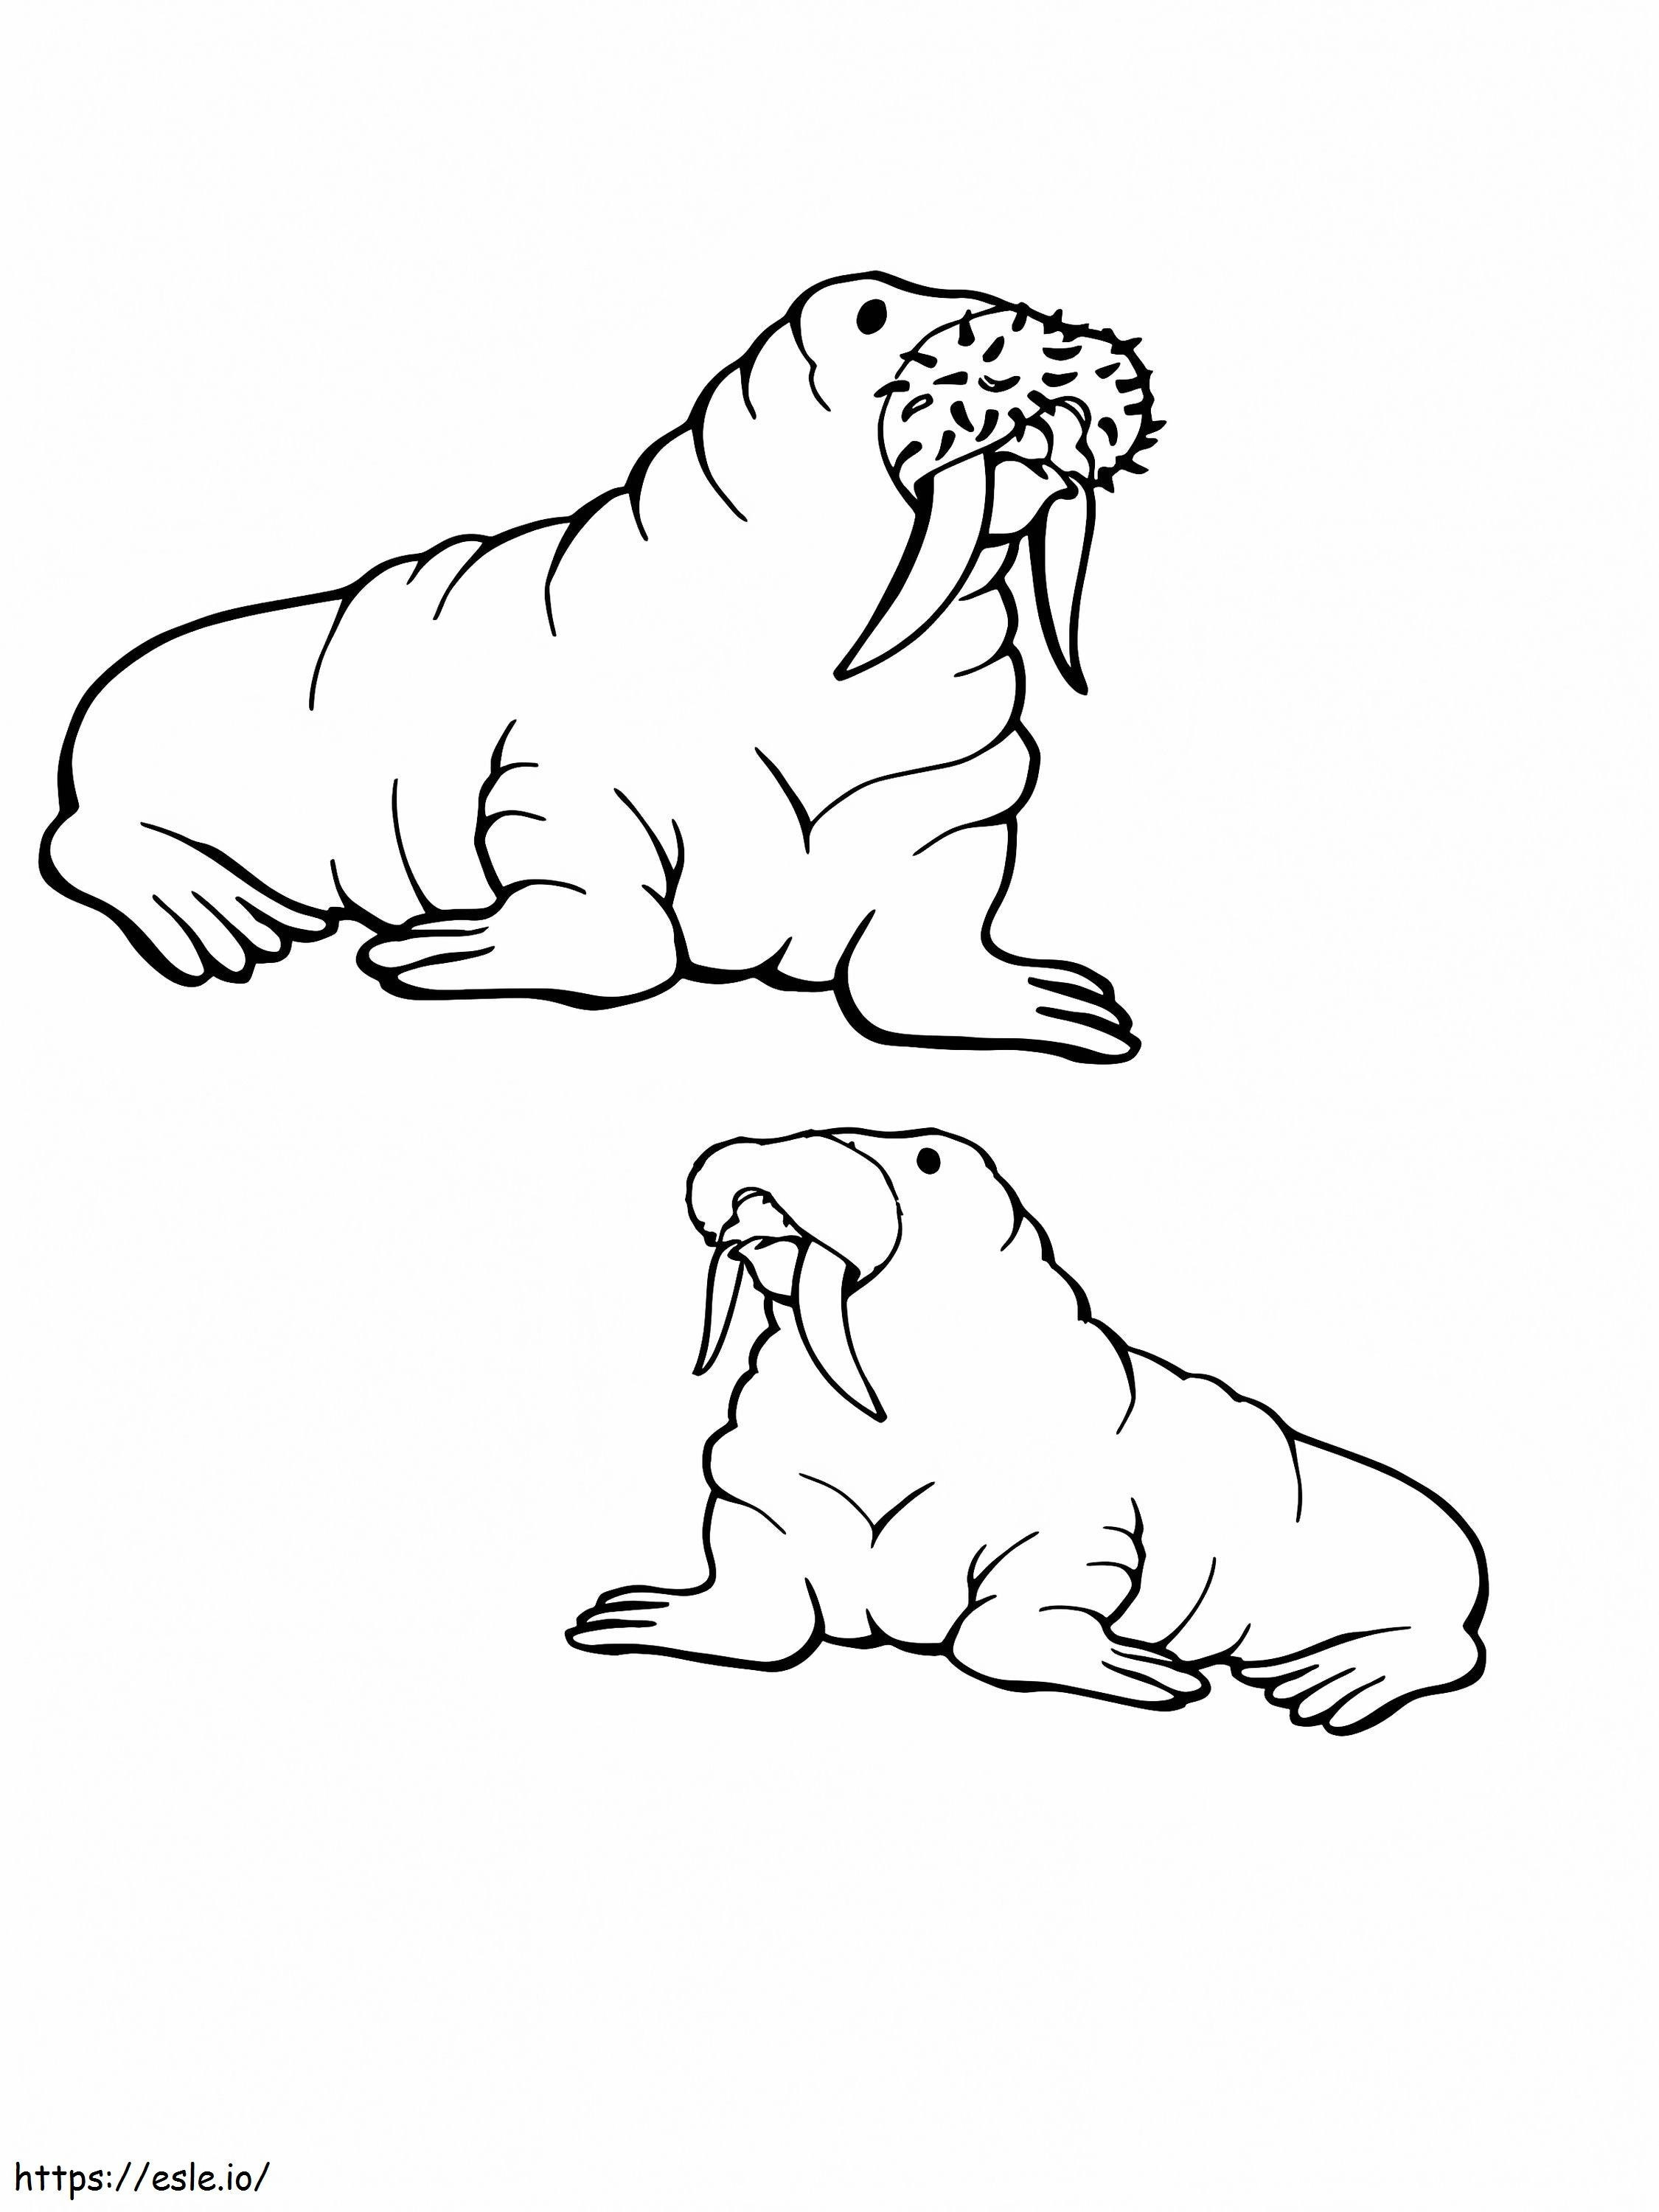 Two Old Walruses Arctic Animals coloring page